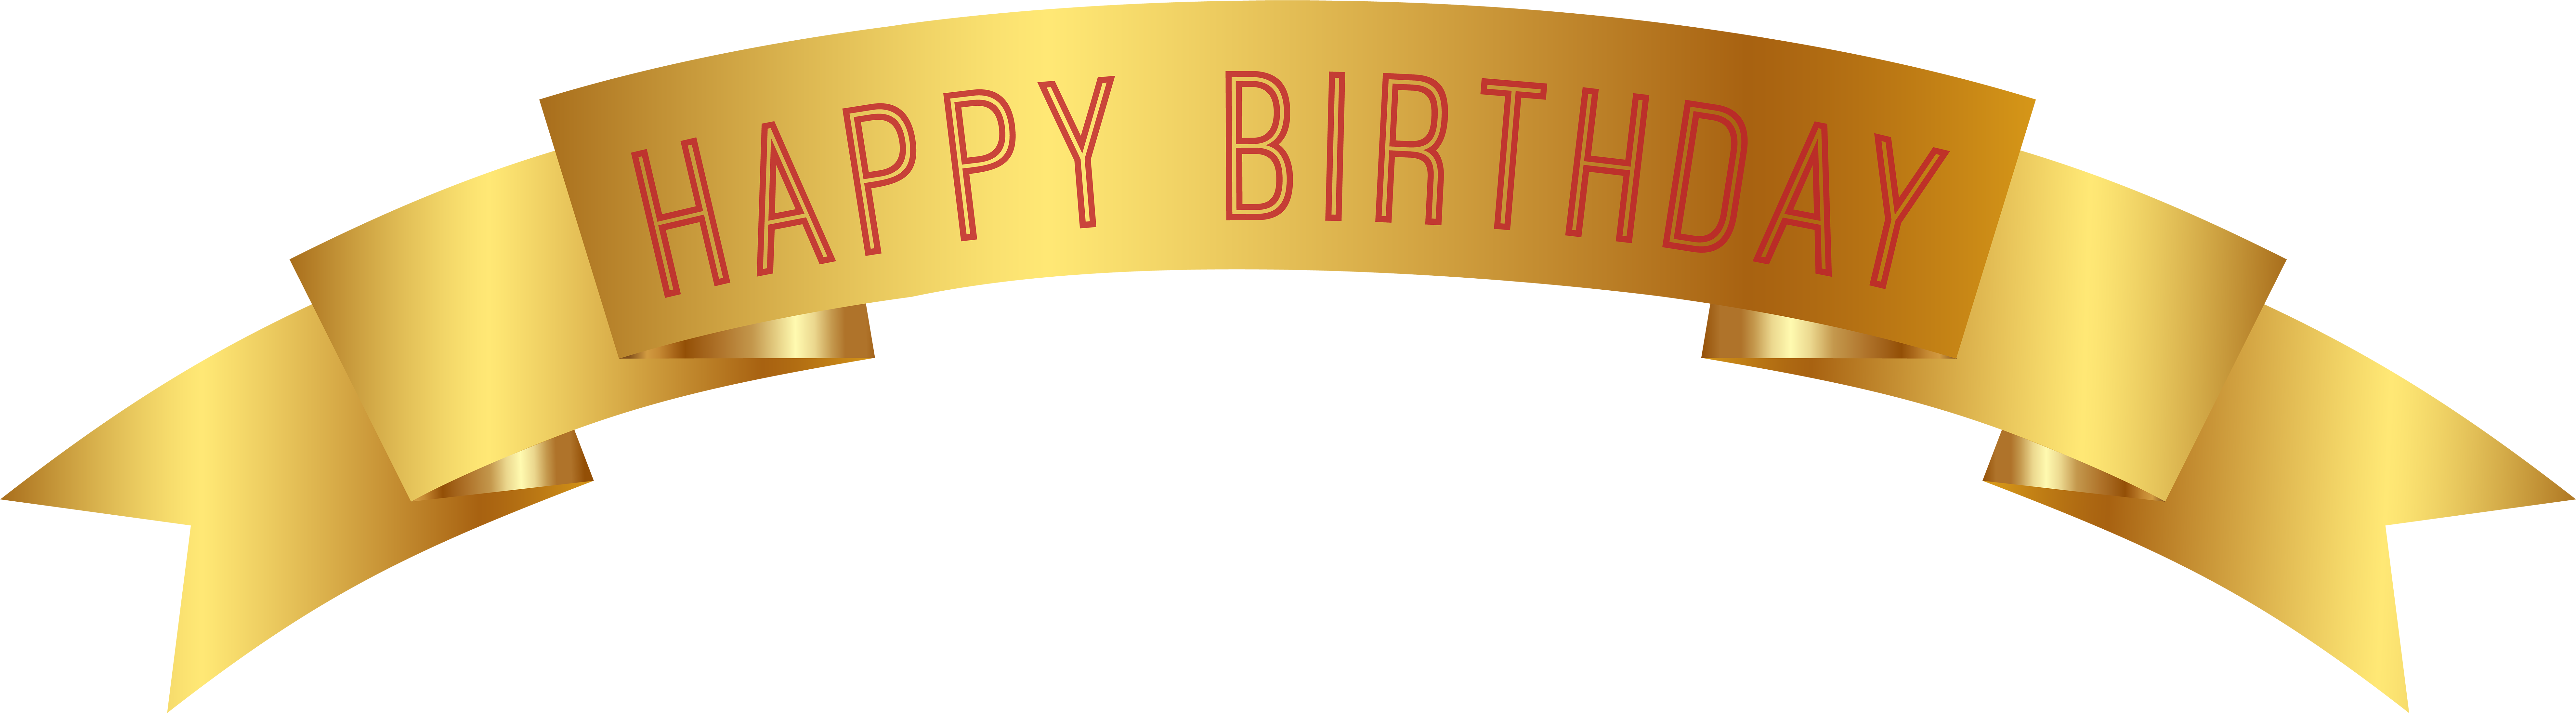 0-result-images-of-happy-birthday-banner-design-png-png-image-collection